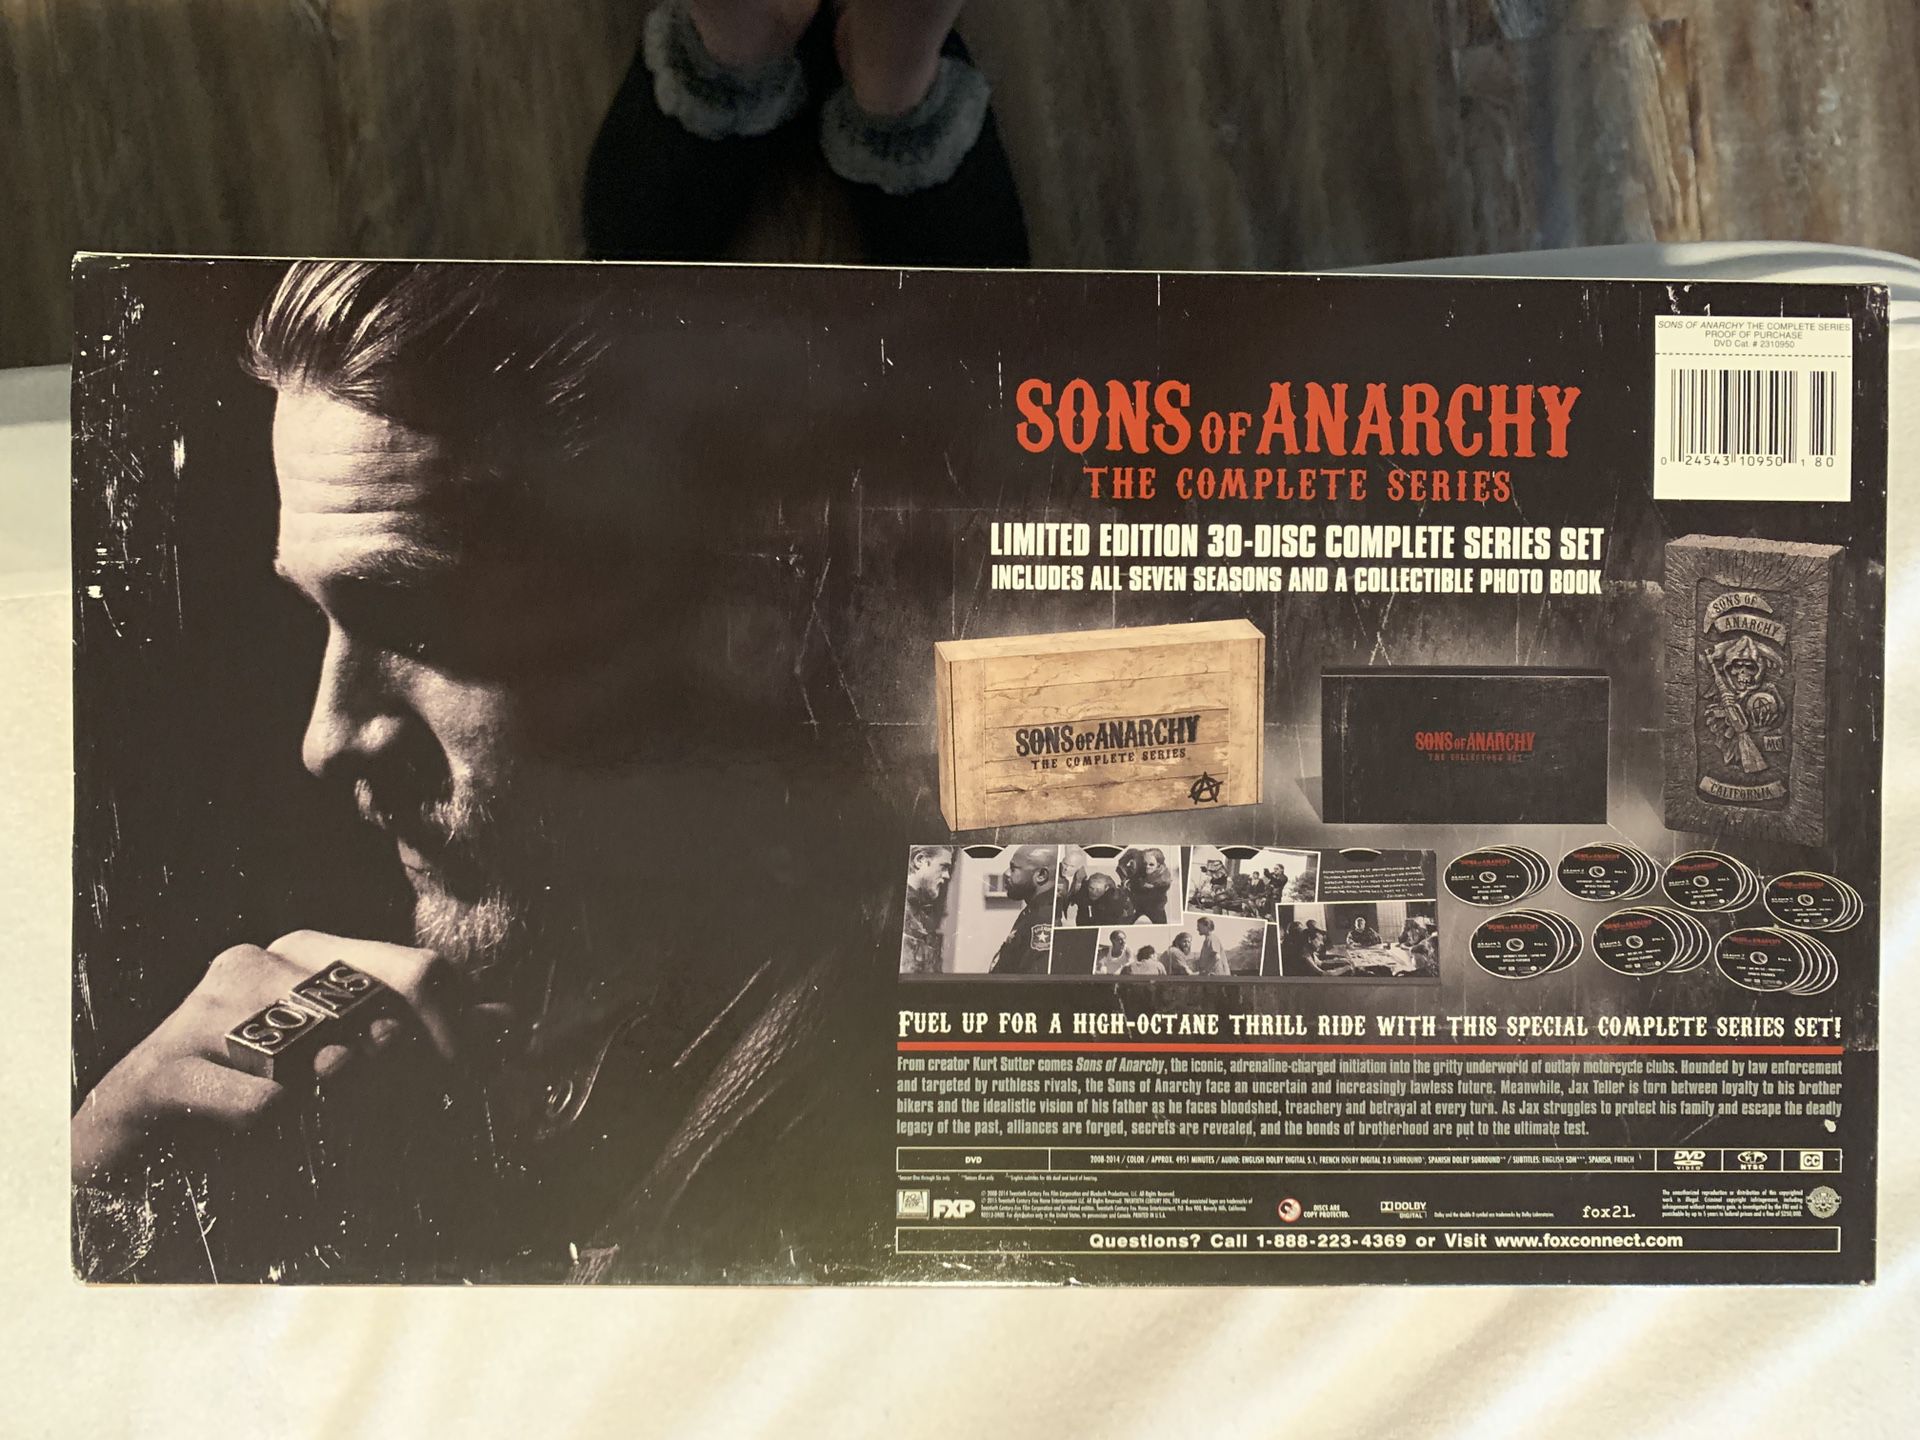 Sons of anarchy Box set, Dvd Collector's Edition